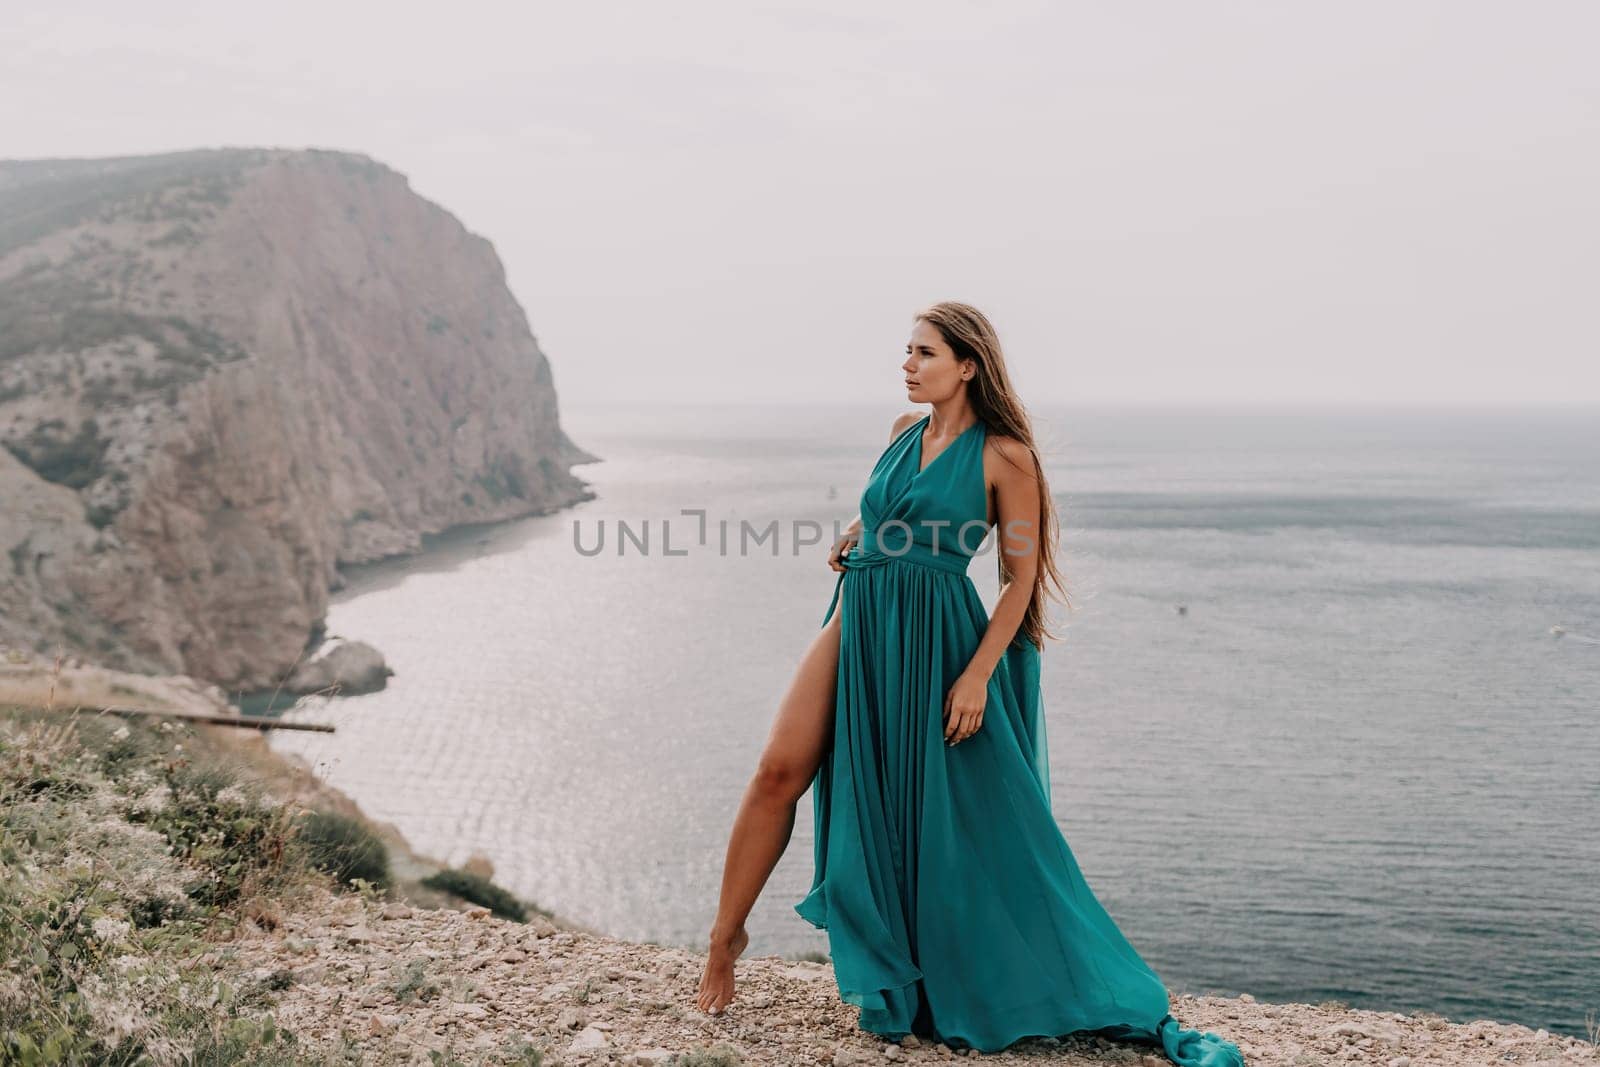 Woman travel portrait. Happy woman with long hair looking at camera and smiling. Close up portrait cute woman in a mint long dress posing on a volcanic rock high above the sea by panophotograph